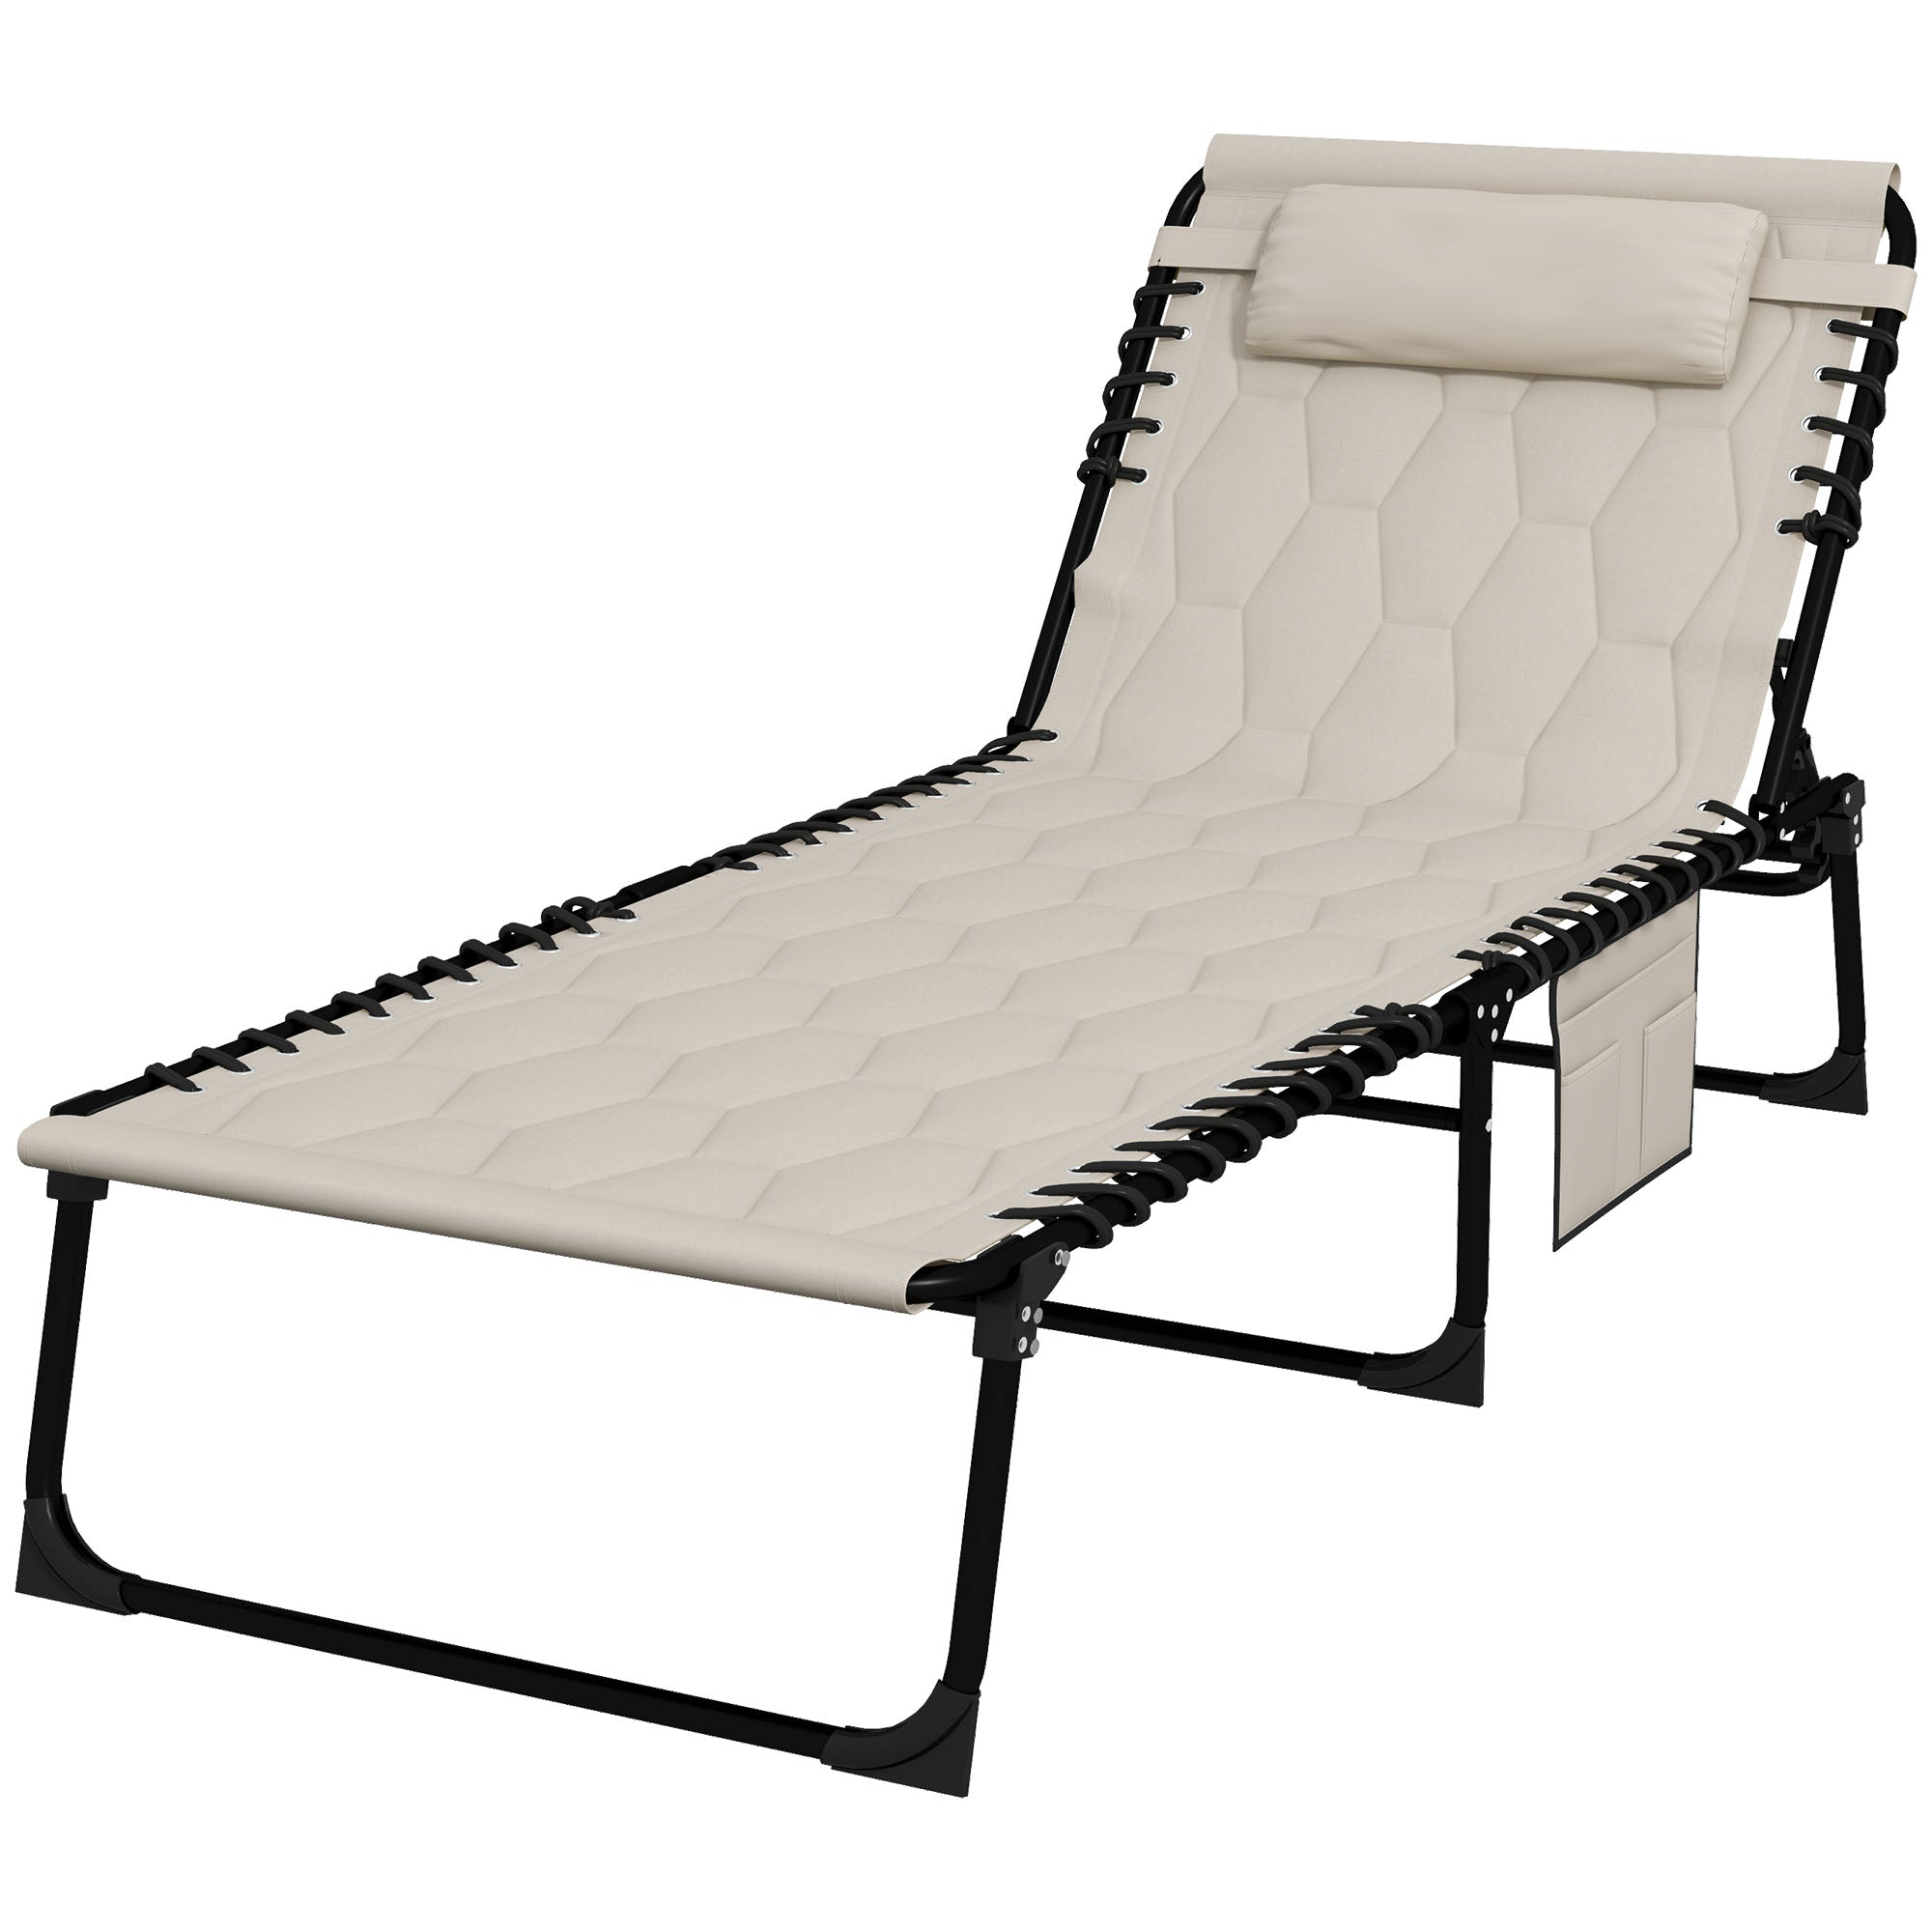 Outsunny Foldable Sun Lounger Set with 5-level Reclining Back, Outdoor Tanning Chairs Sun Loungers with Build-in Padded Seat, Side Pocket, Headrest for Beach, Yard, Patio, Khaki